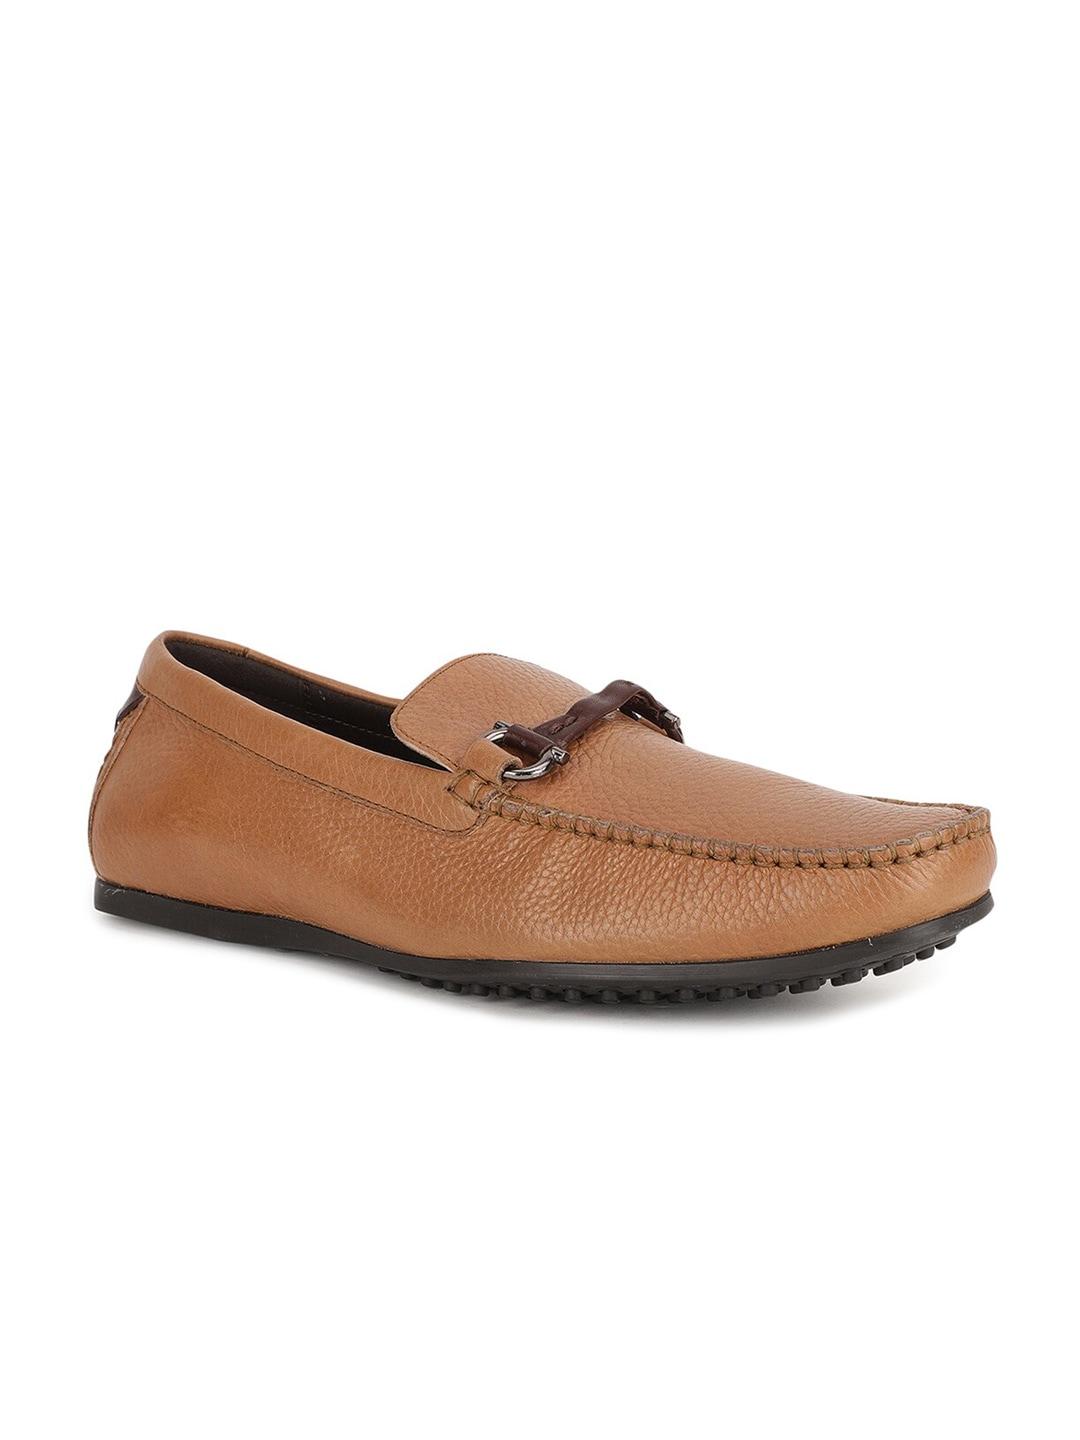 Hush Puppies Men Tan Textured Leather Loafers